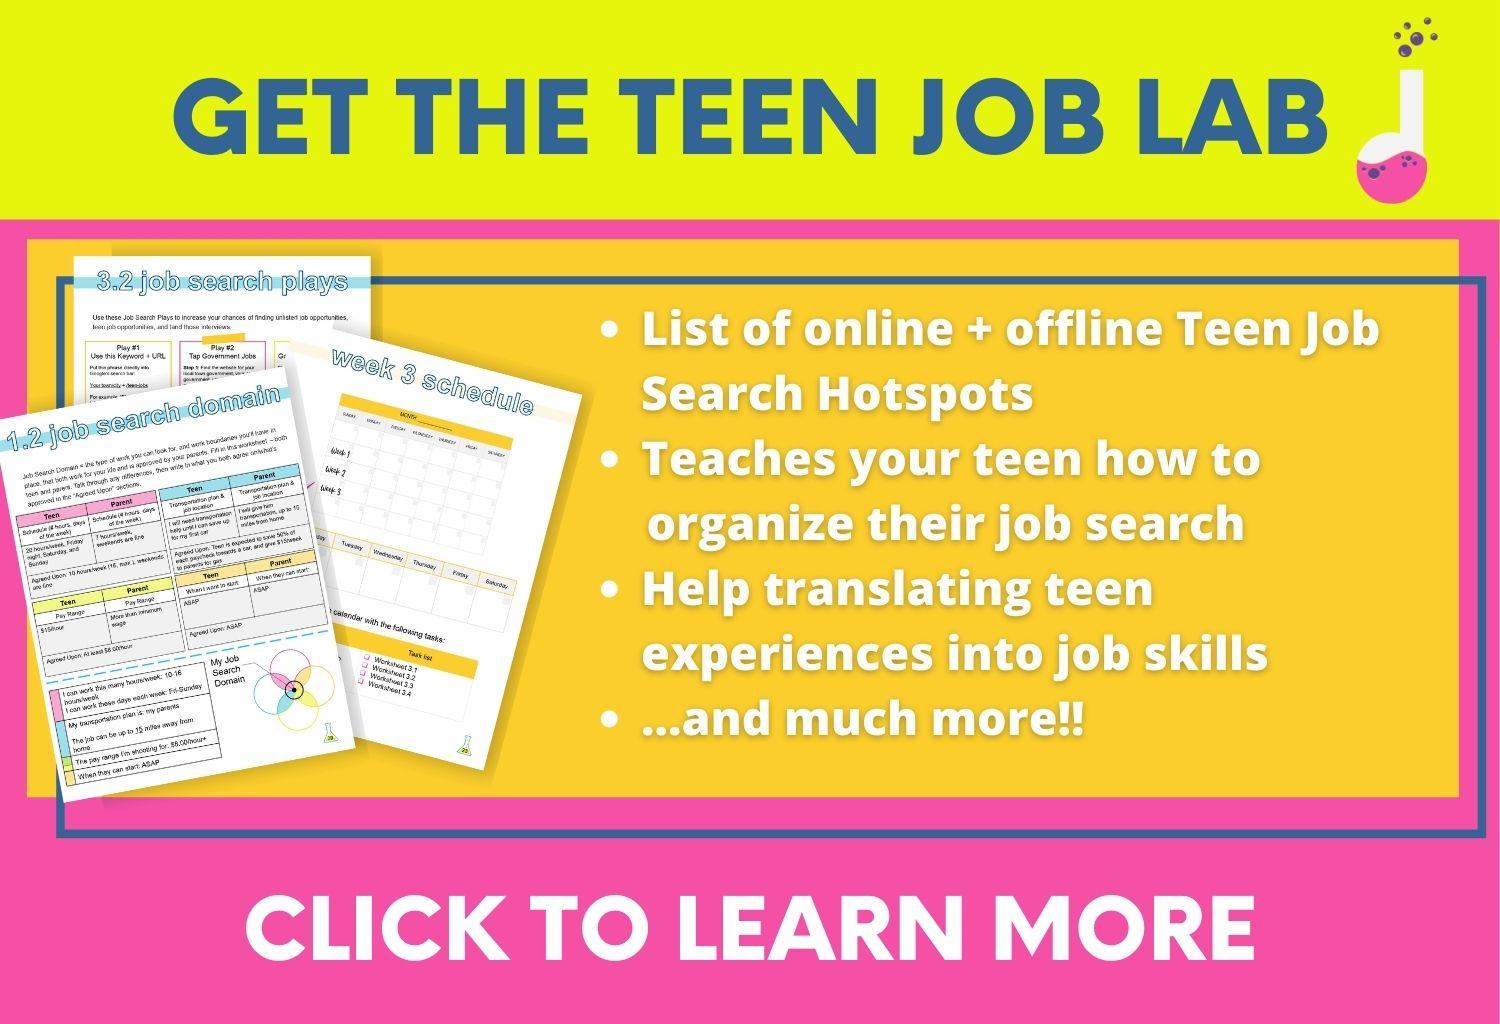 Online Jobs For 16 Year Olds At Home: Maximizing Earning Potential: Social Media Management Jobs for 16 Year Olds